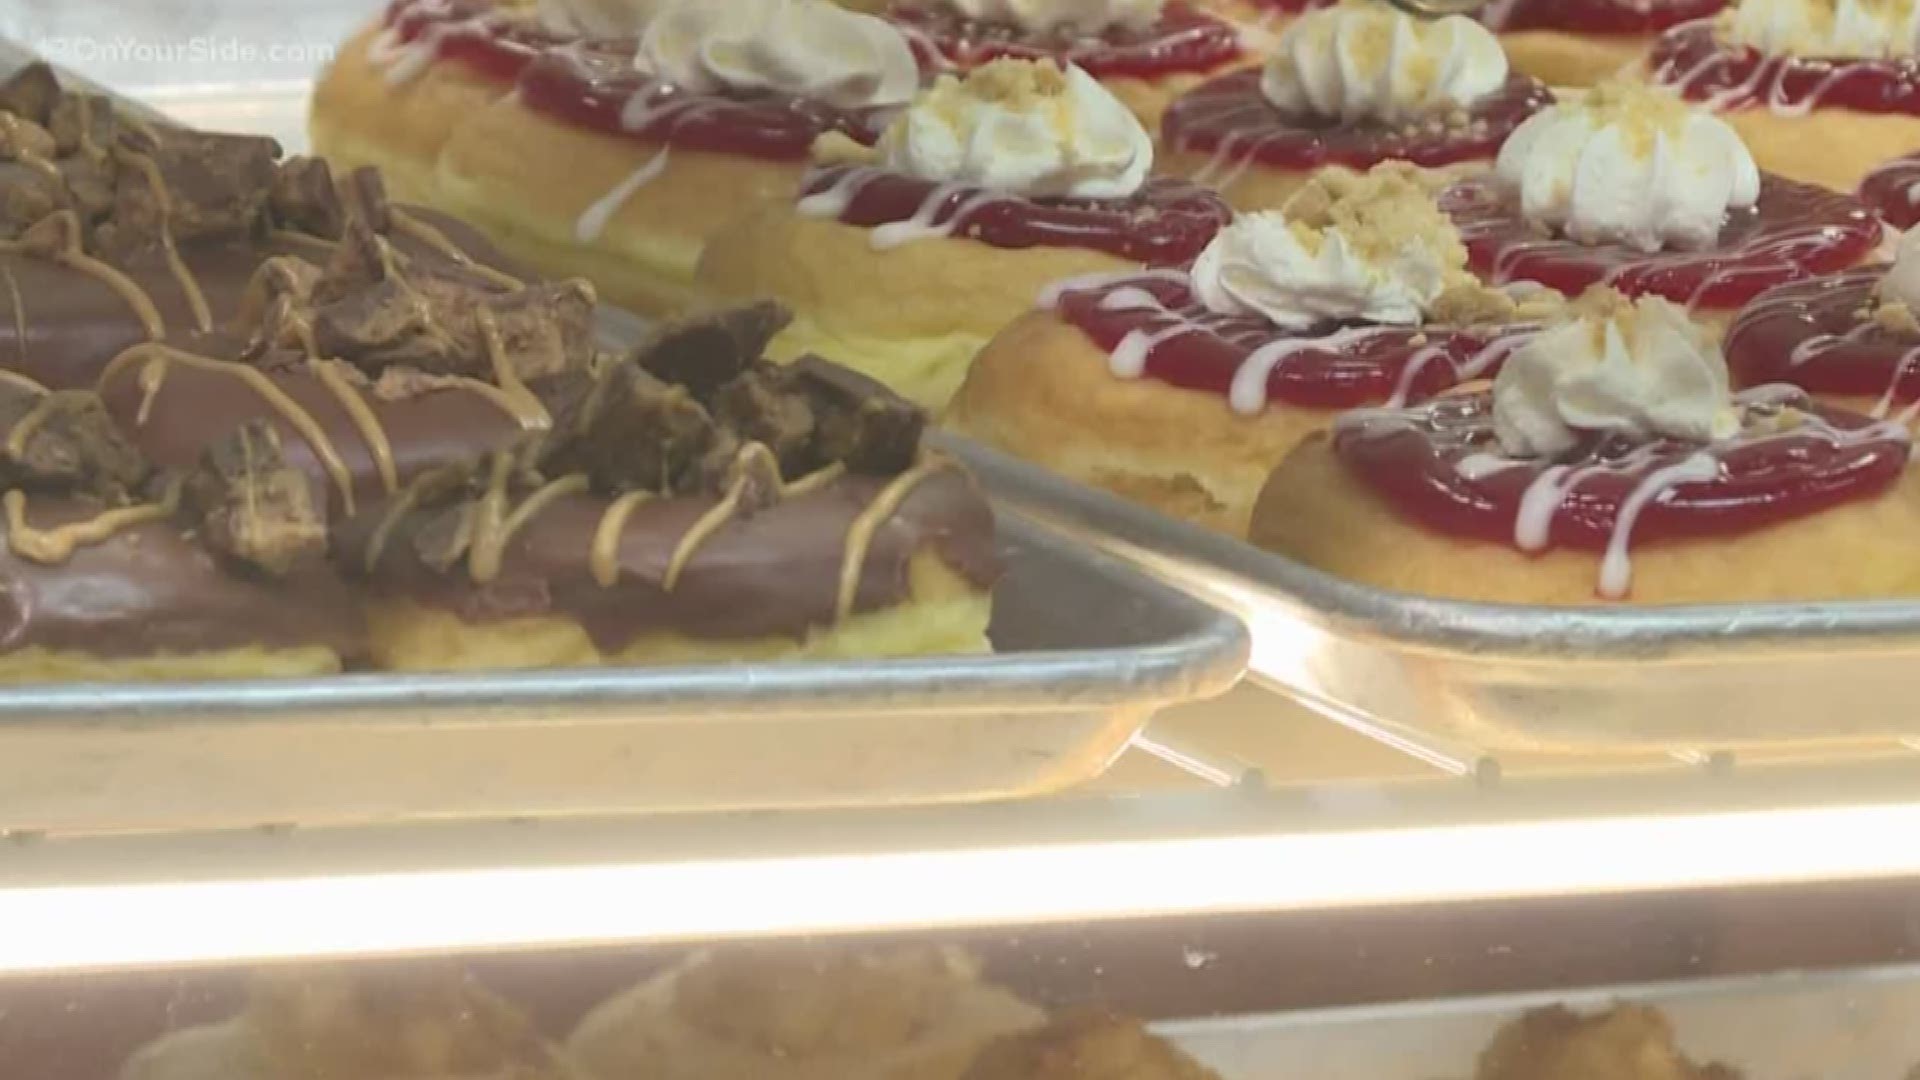 The popular donut shop's third location in West Michigan opened Monday morning.